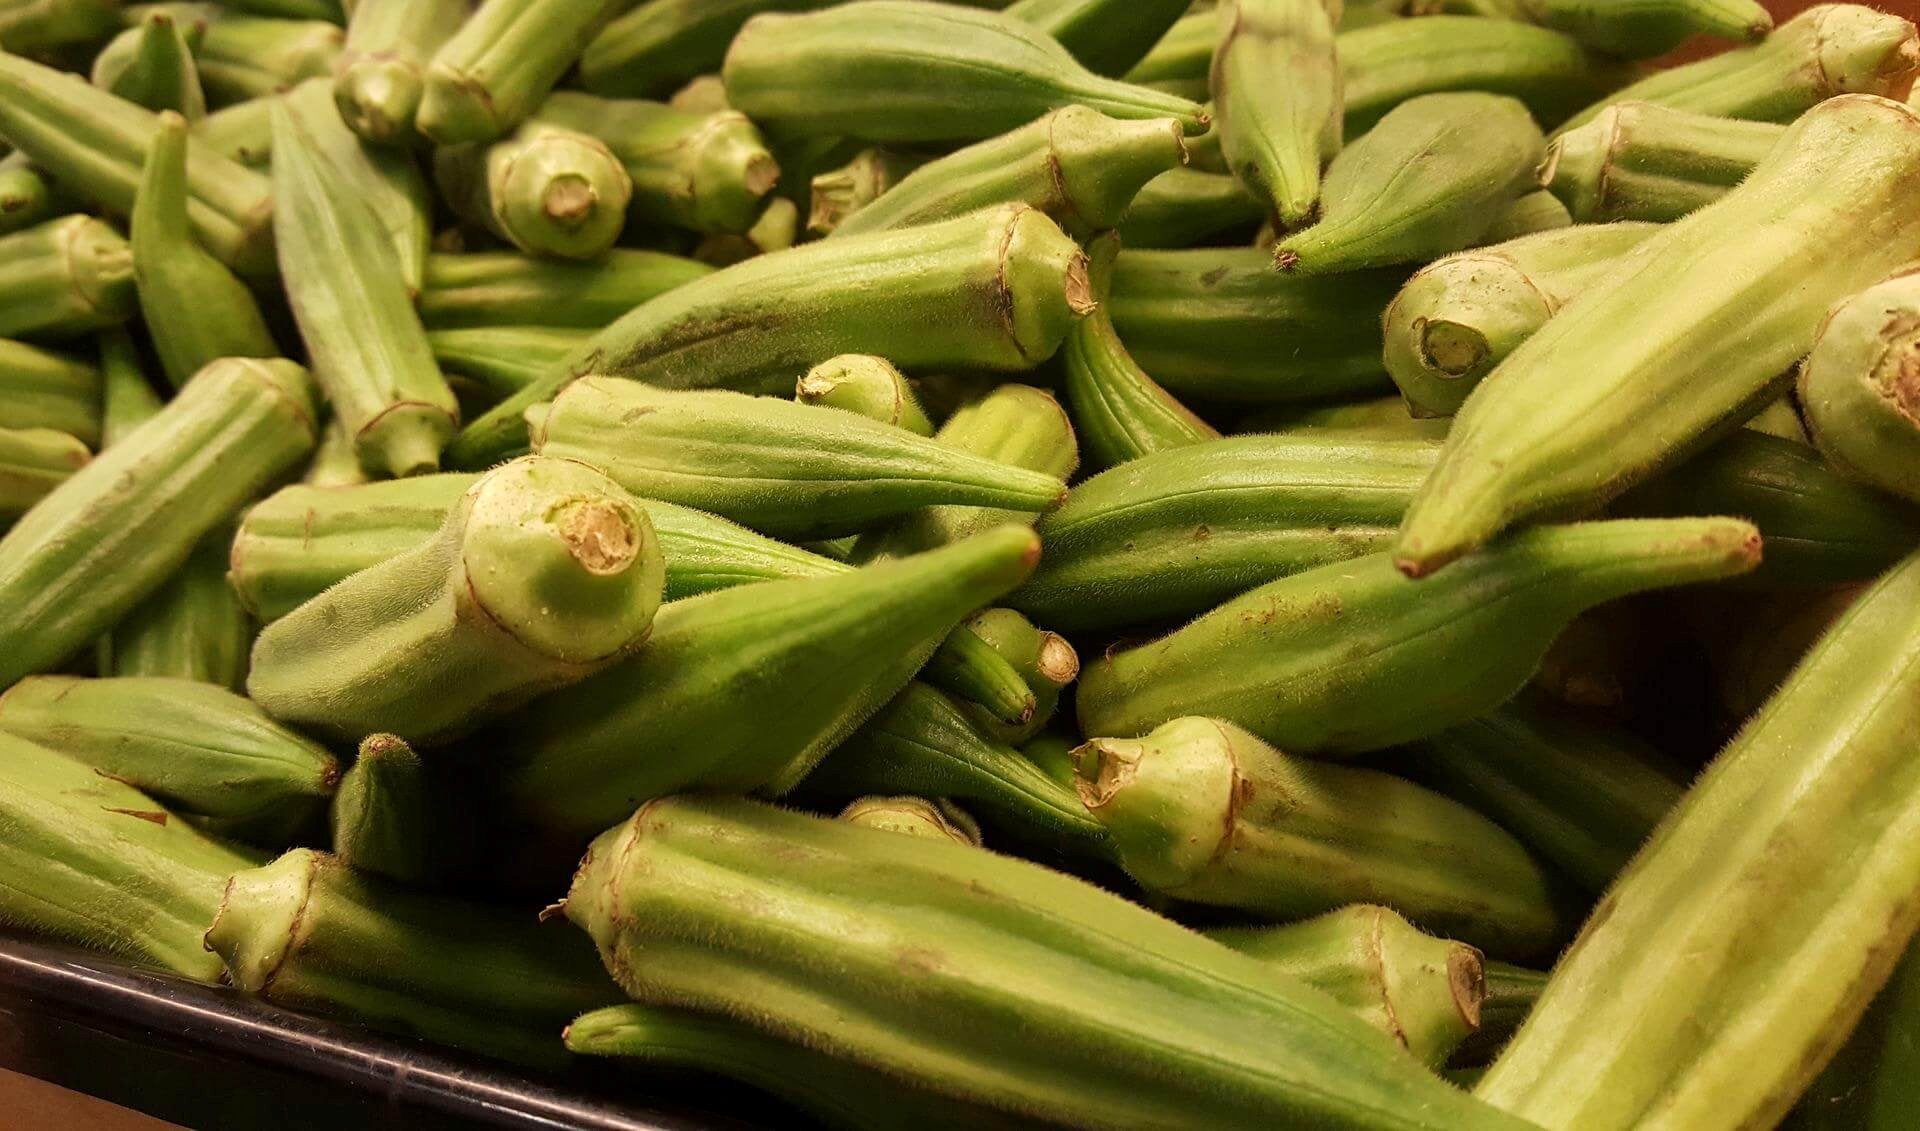 Grow your own fresh green okra pods